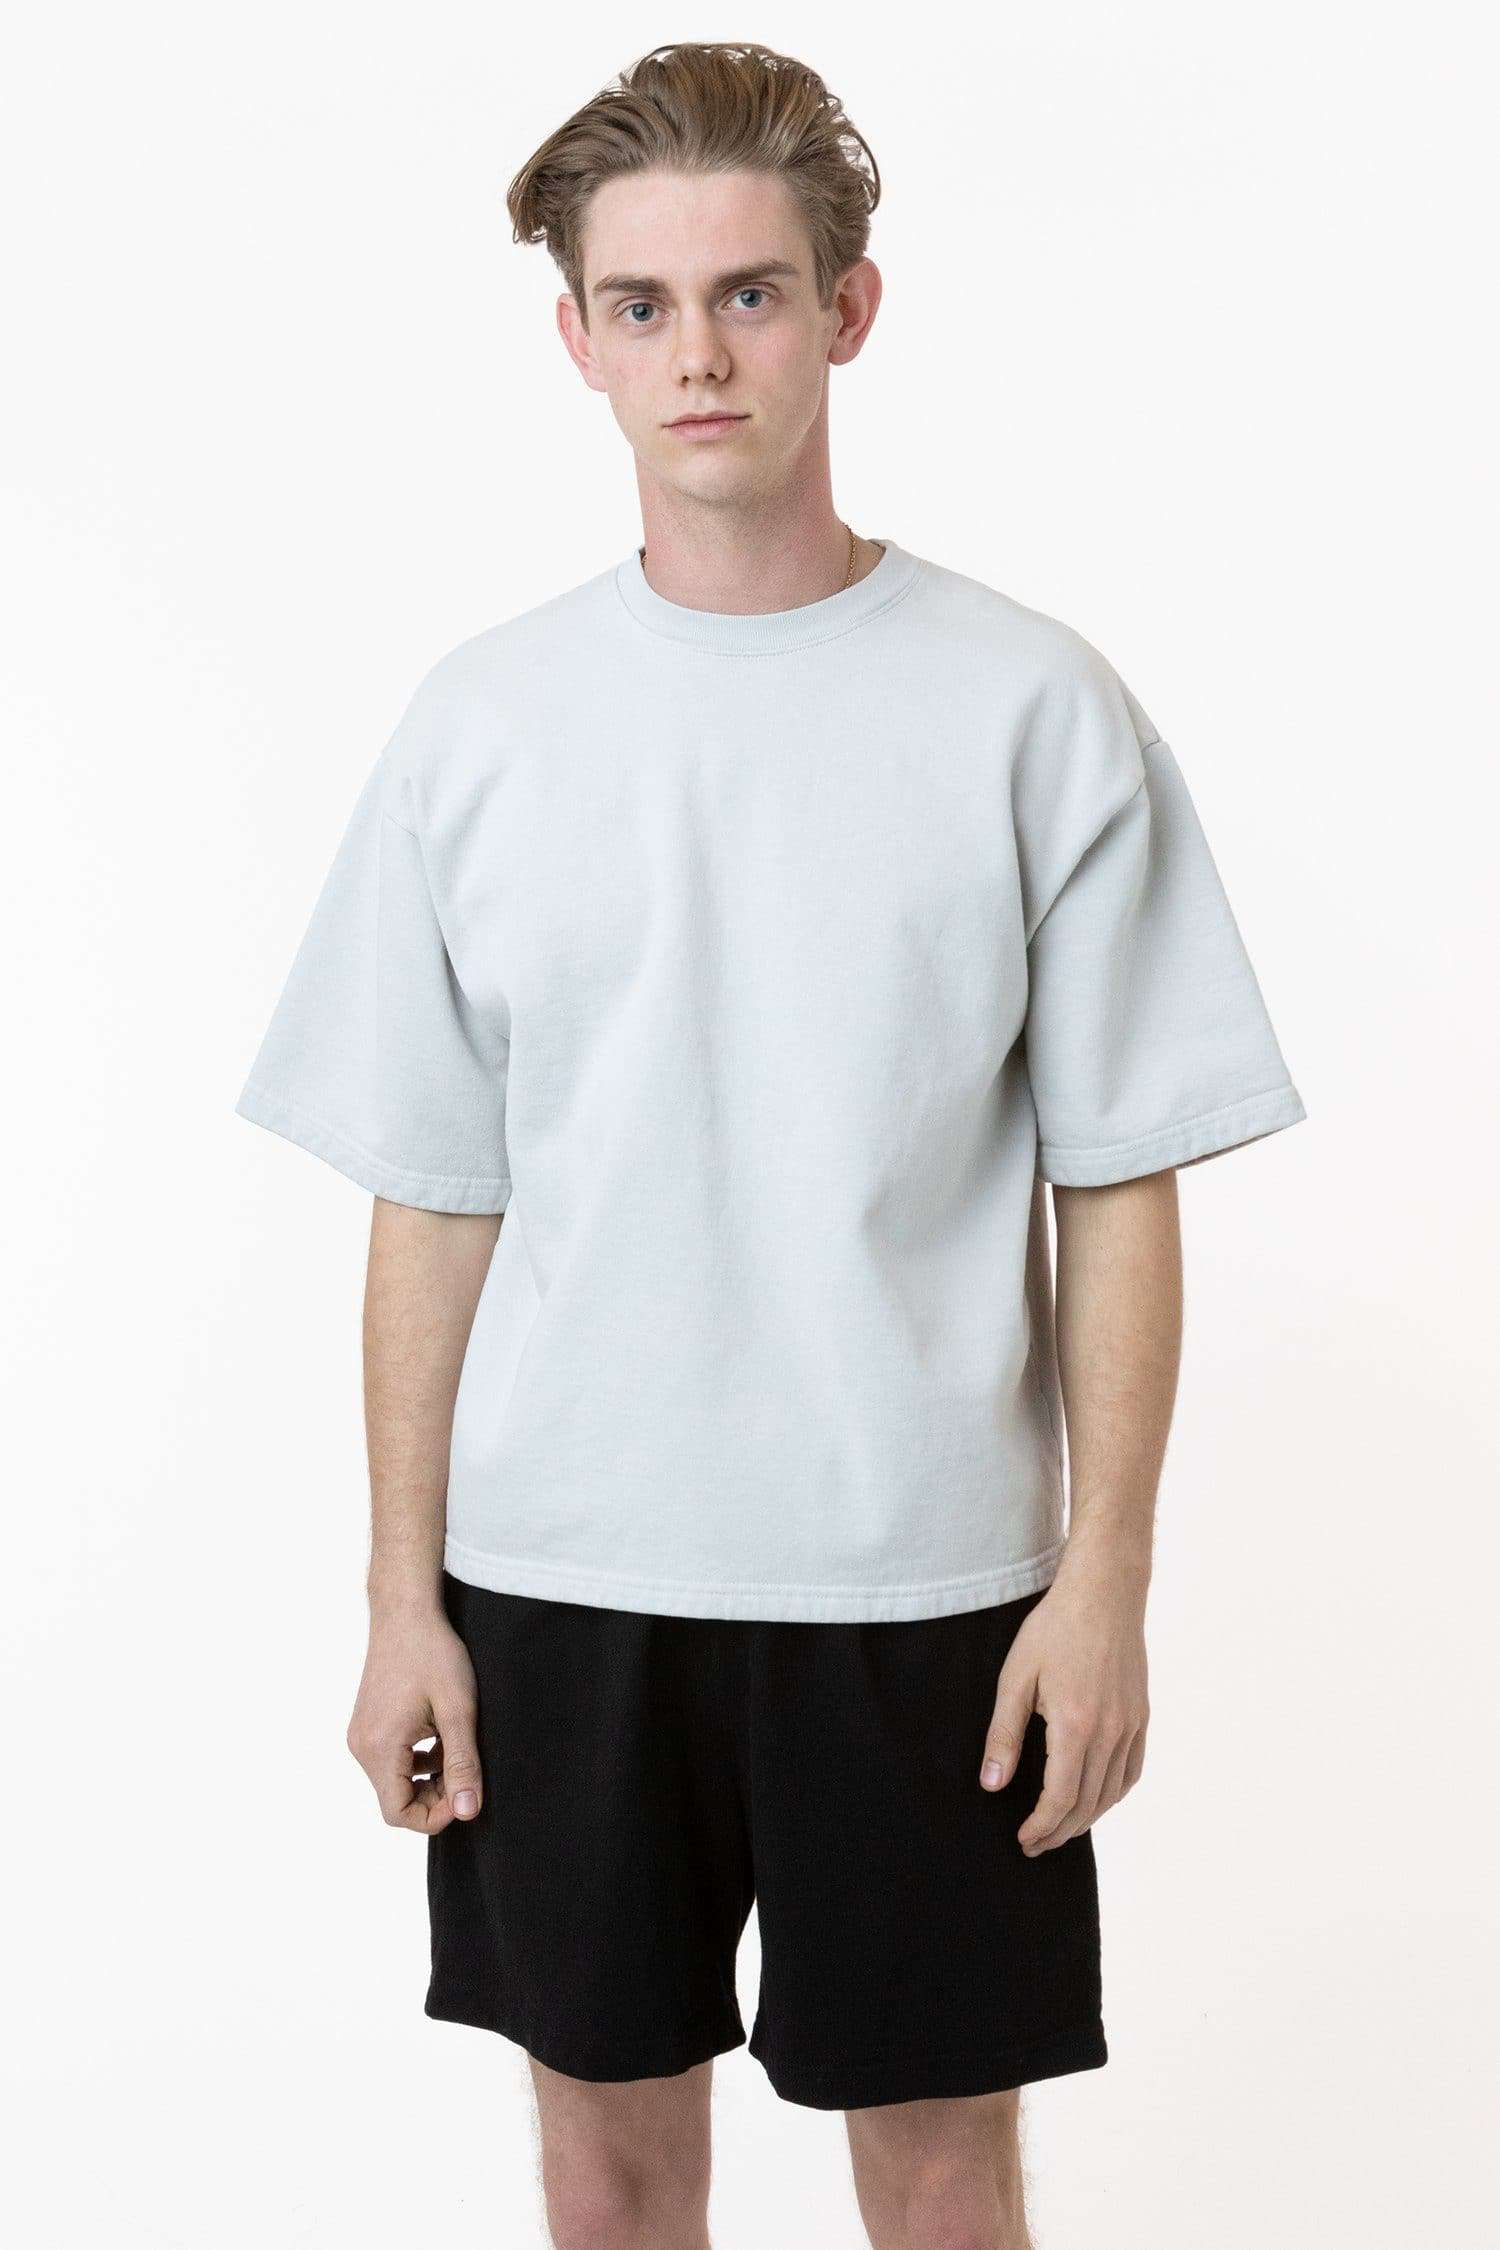 Oversized White Tee Size S High Frequency HF Apparel